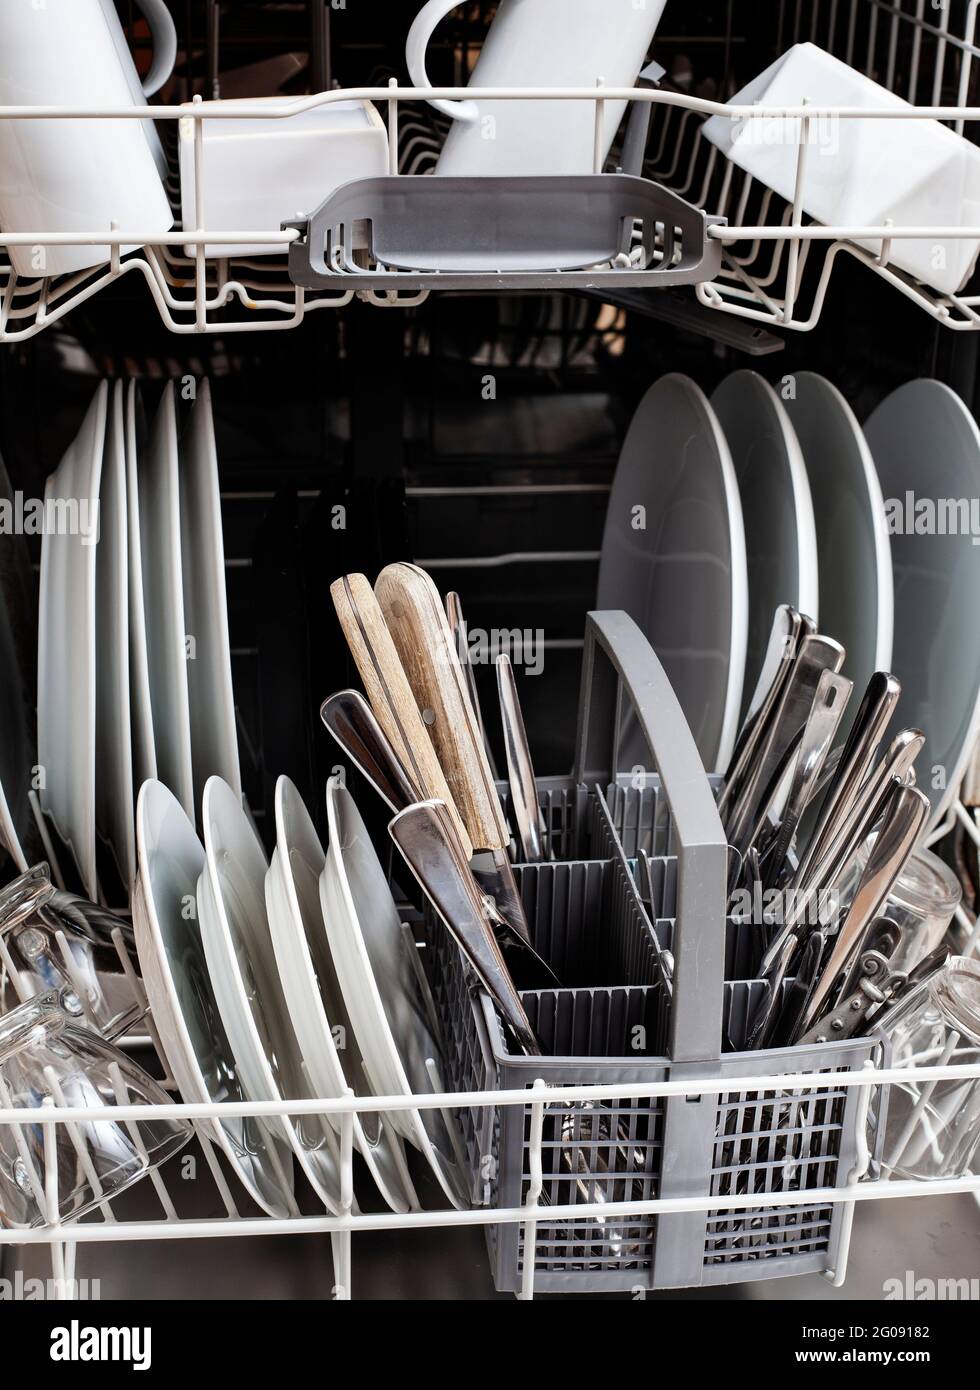 dishes in dishwasher Stock Photo